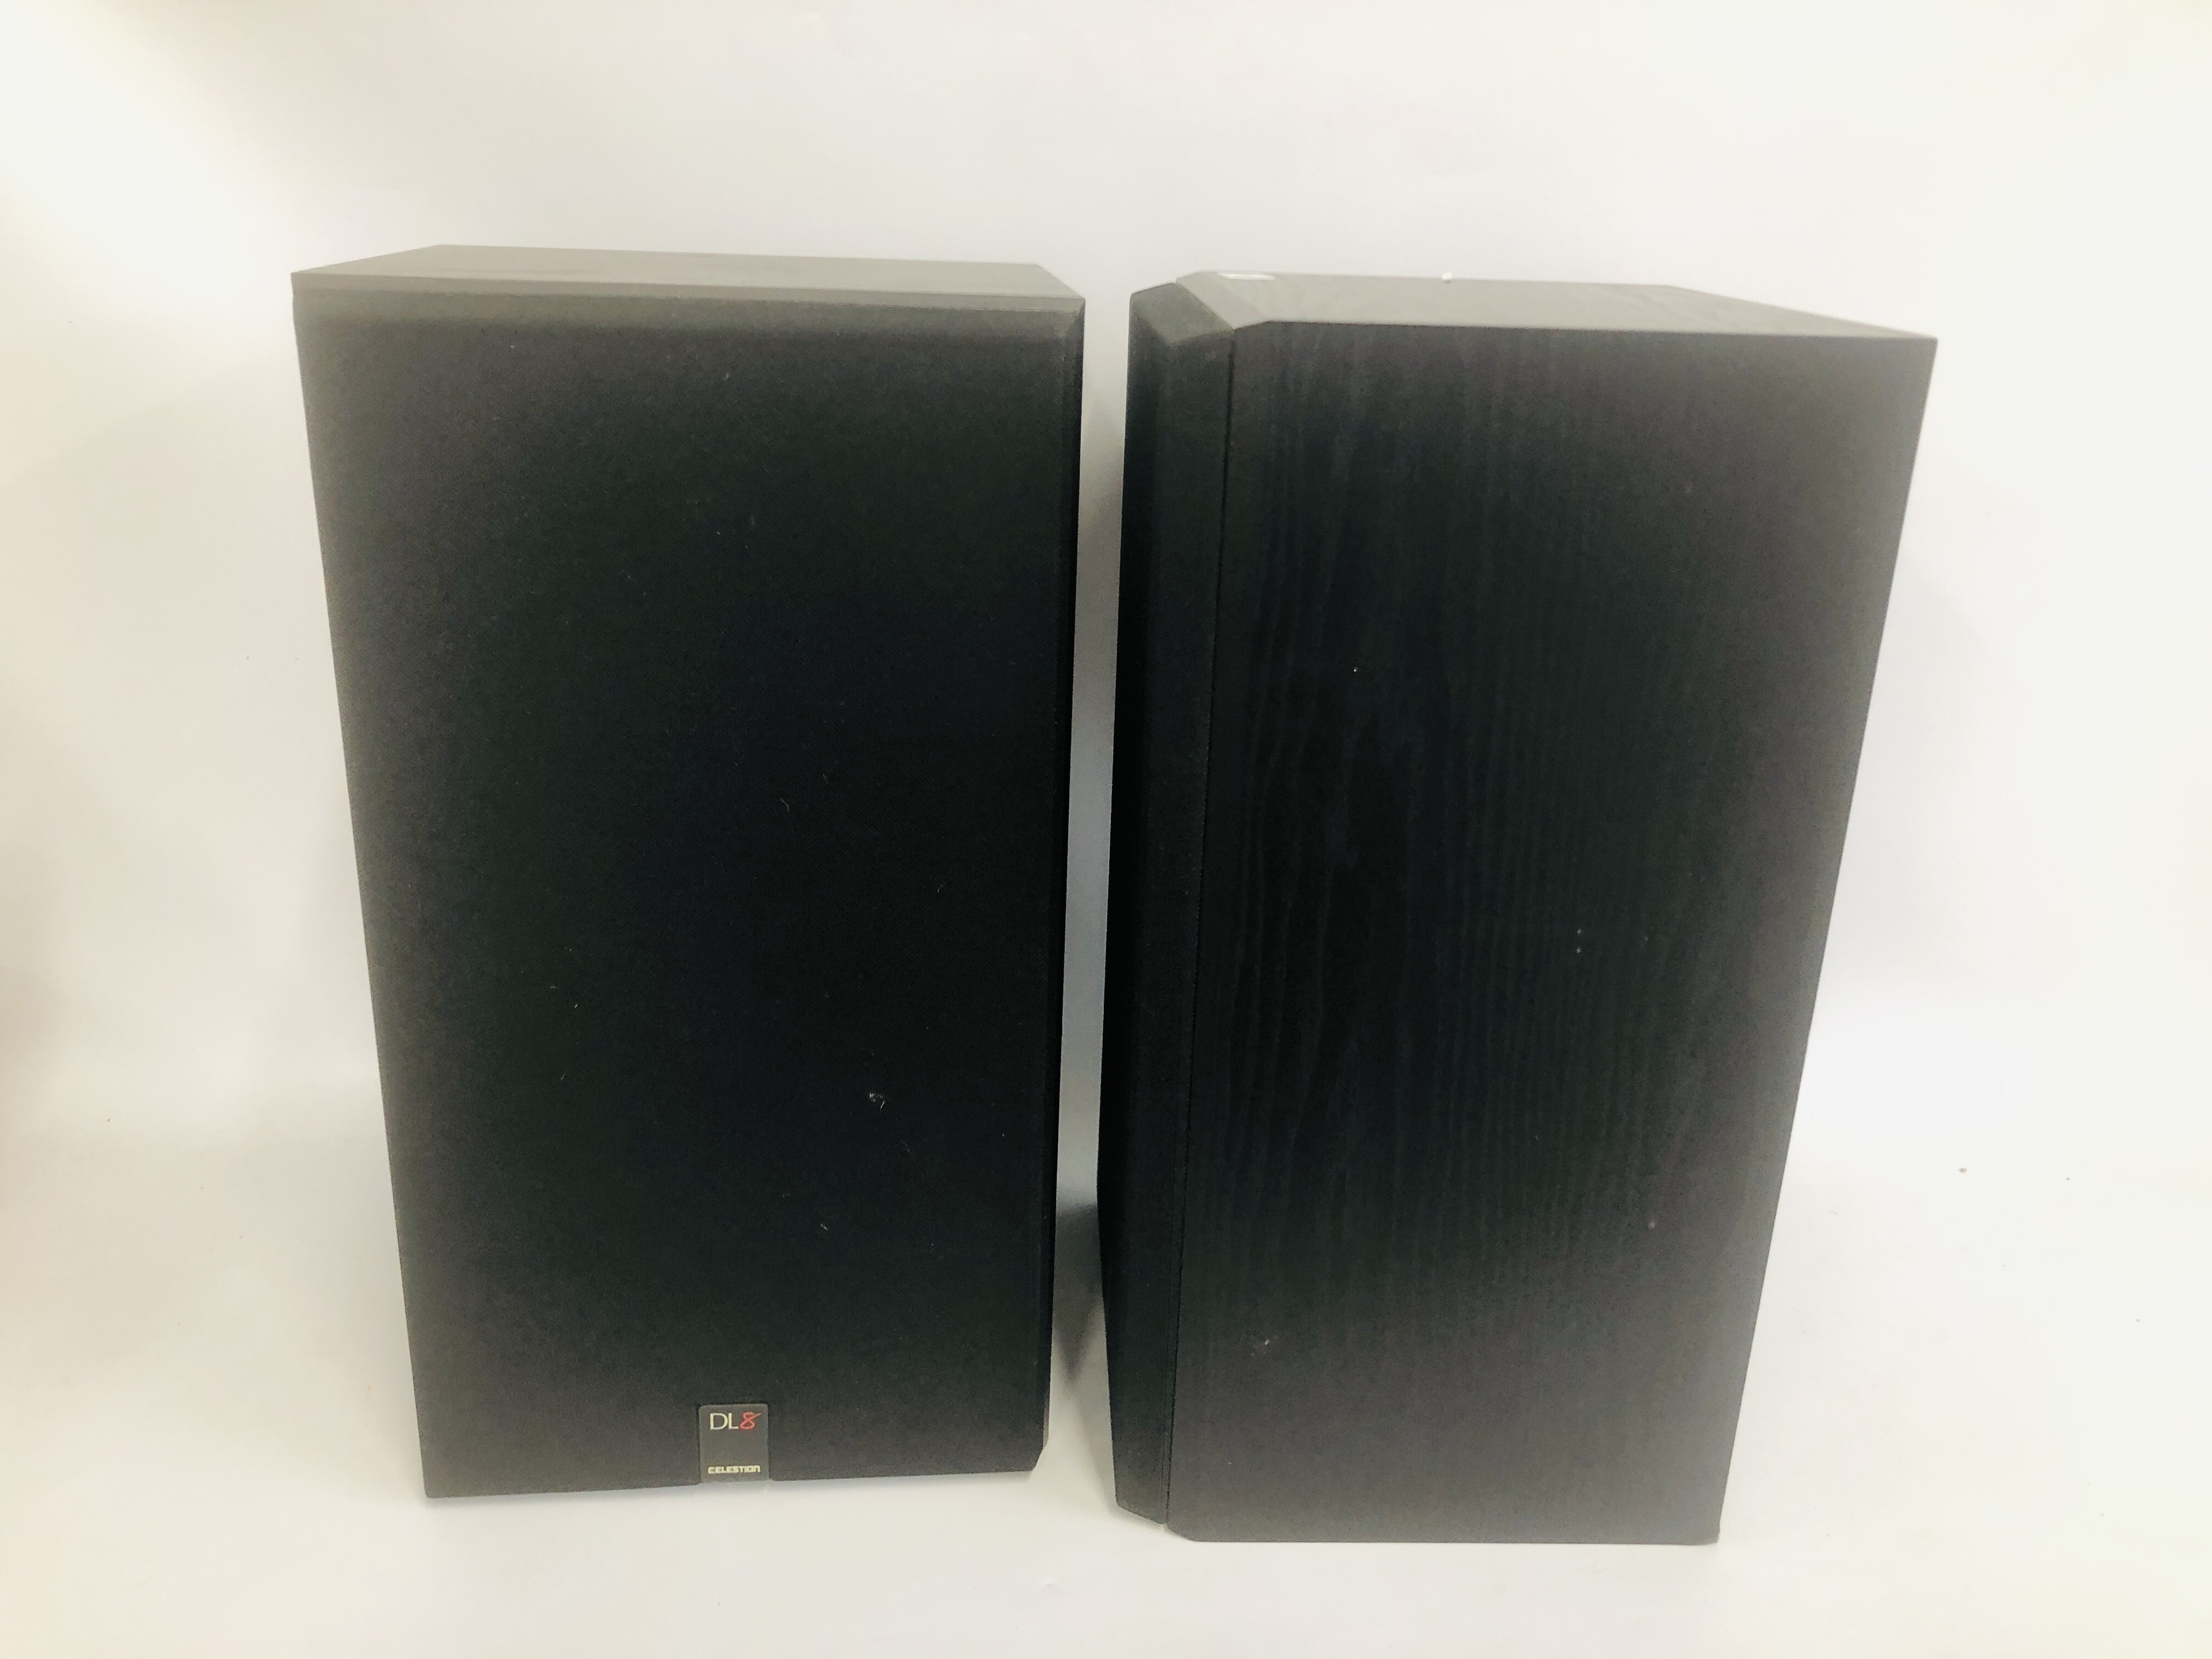 PAIR OF CELESTRON DL8 LOUDSPEAKERS (BLACK ASH FINISH CABINETS) - SOLD AS SEEN - Image 4 of 5